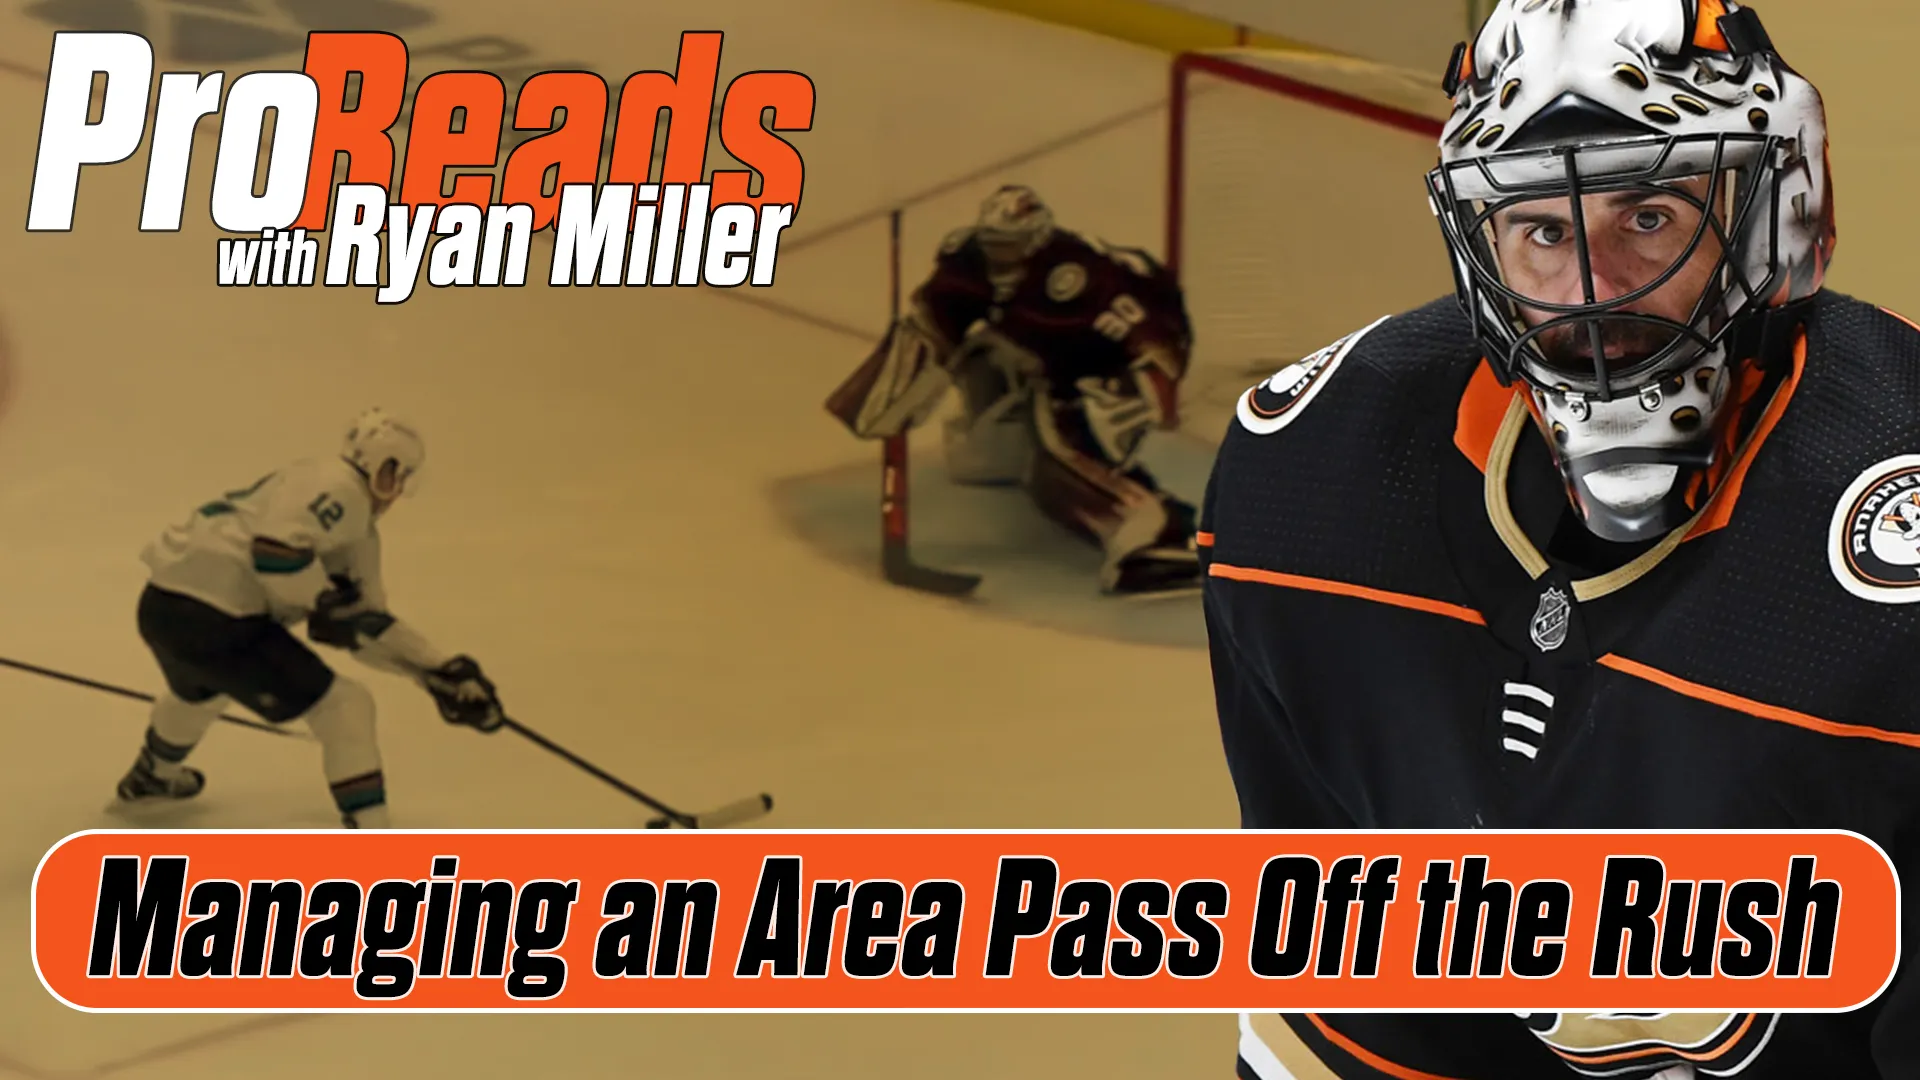 Pro-Reads with Ryan Miller